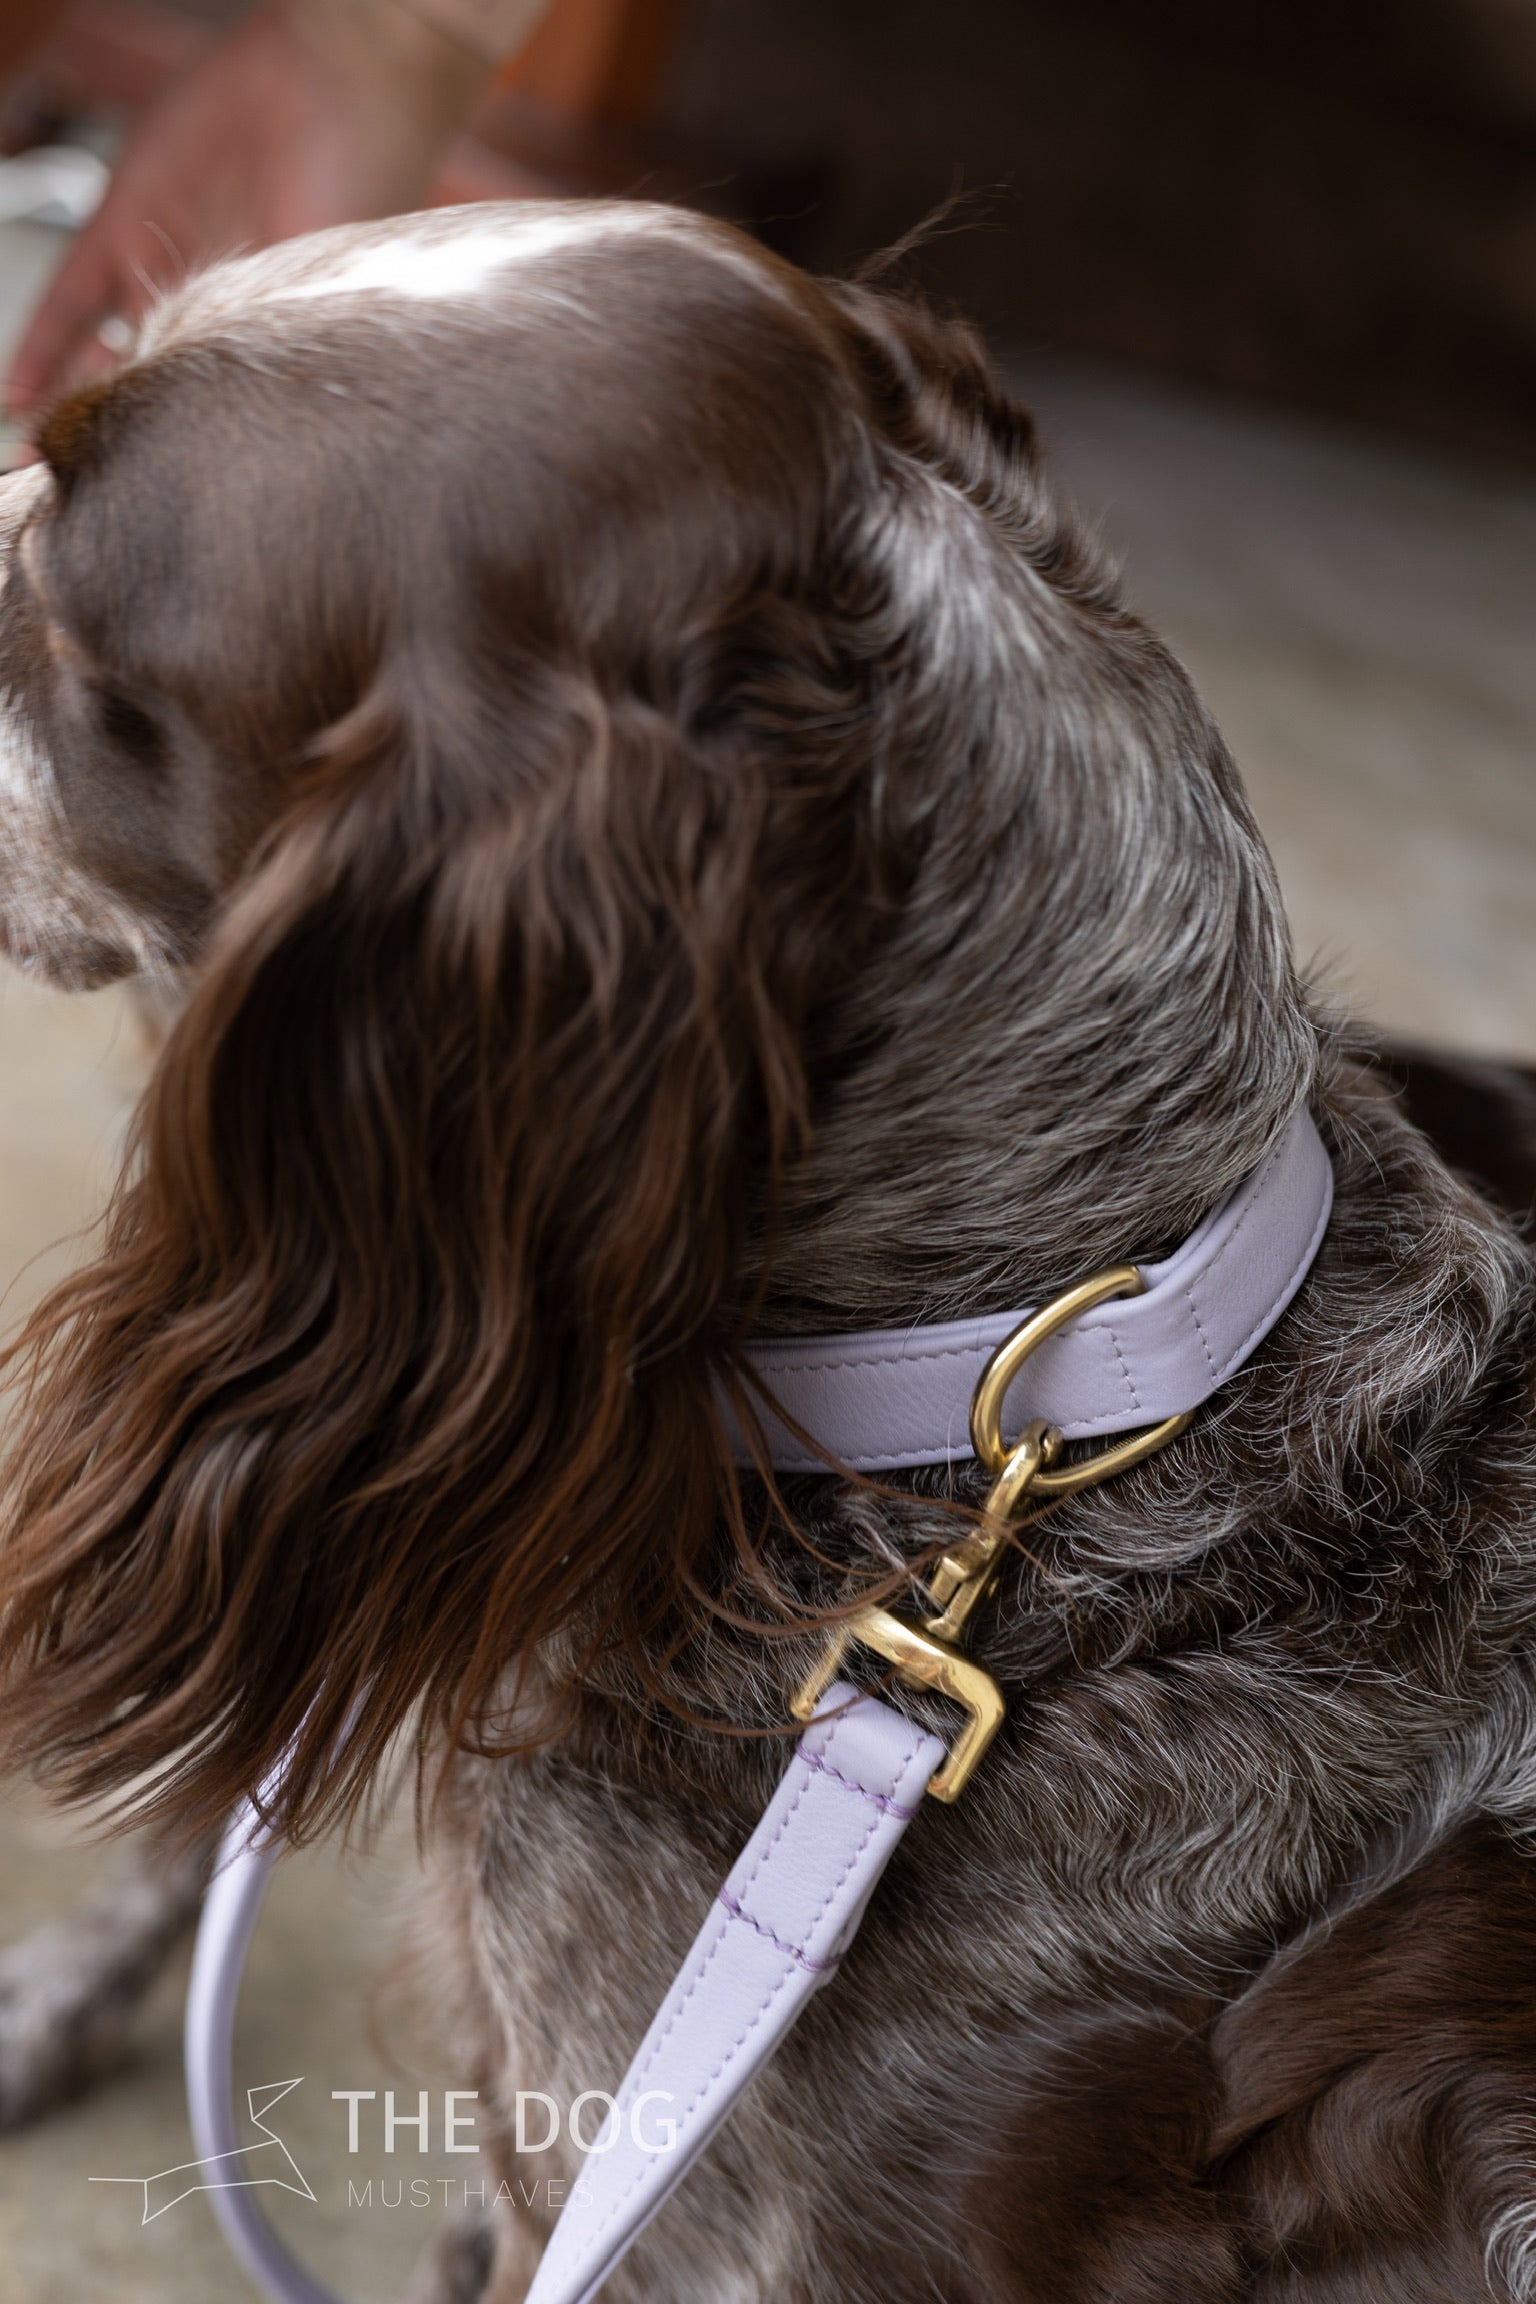 Luxury leather dog collar with name tag - Classic - Lilac